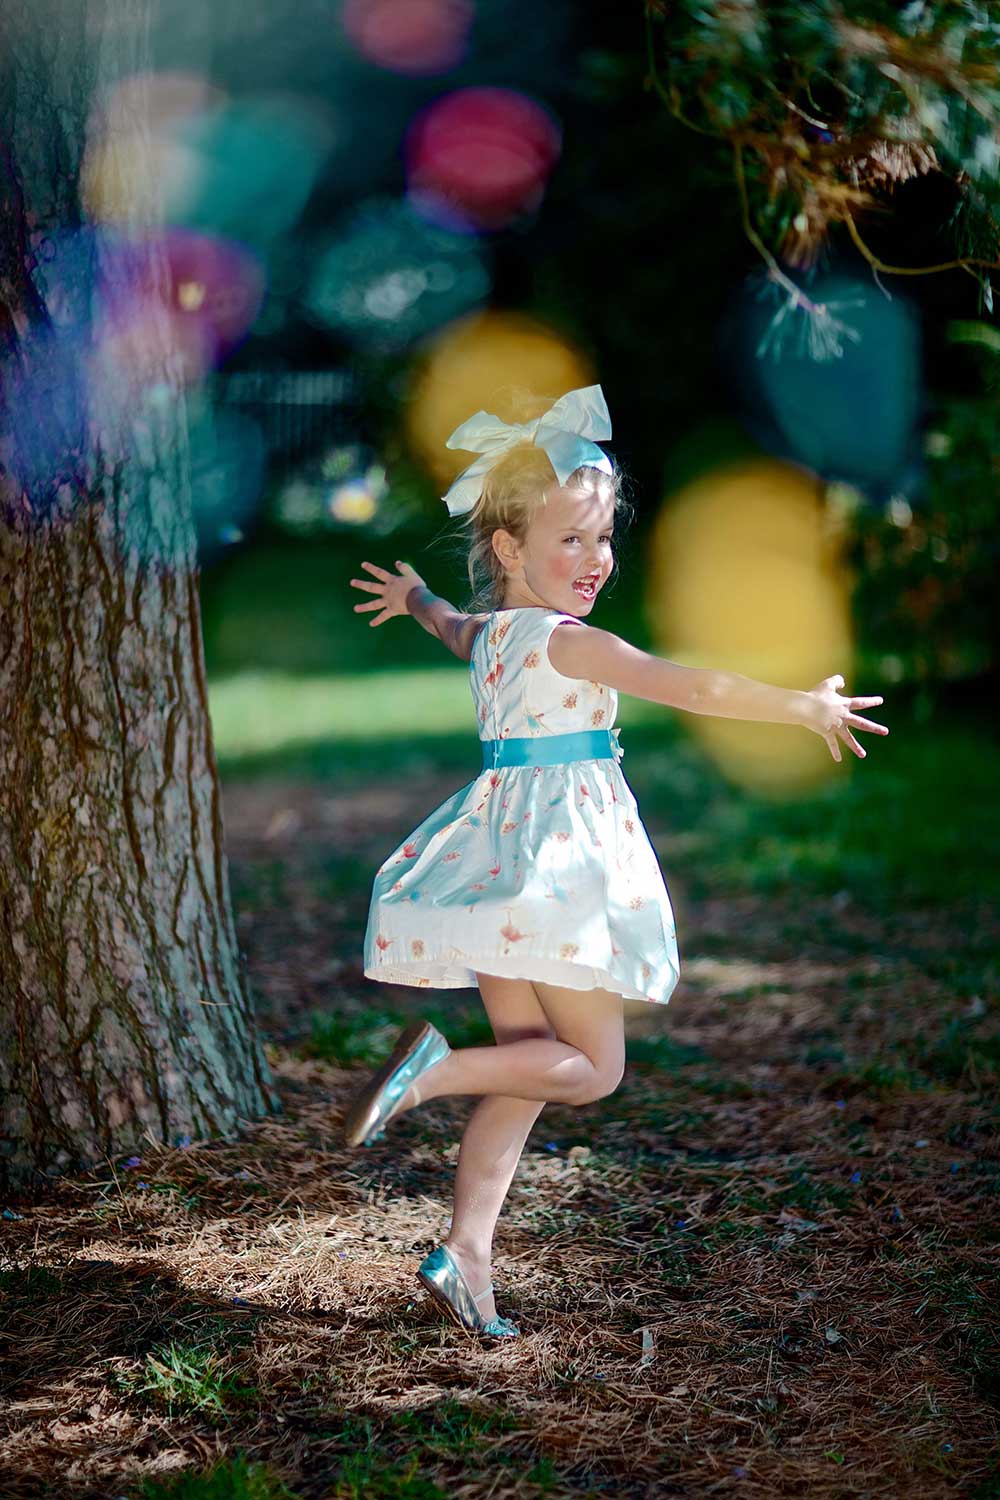 A young girl dancing in the woods